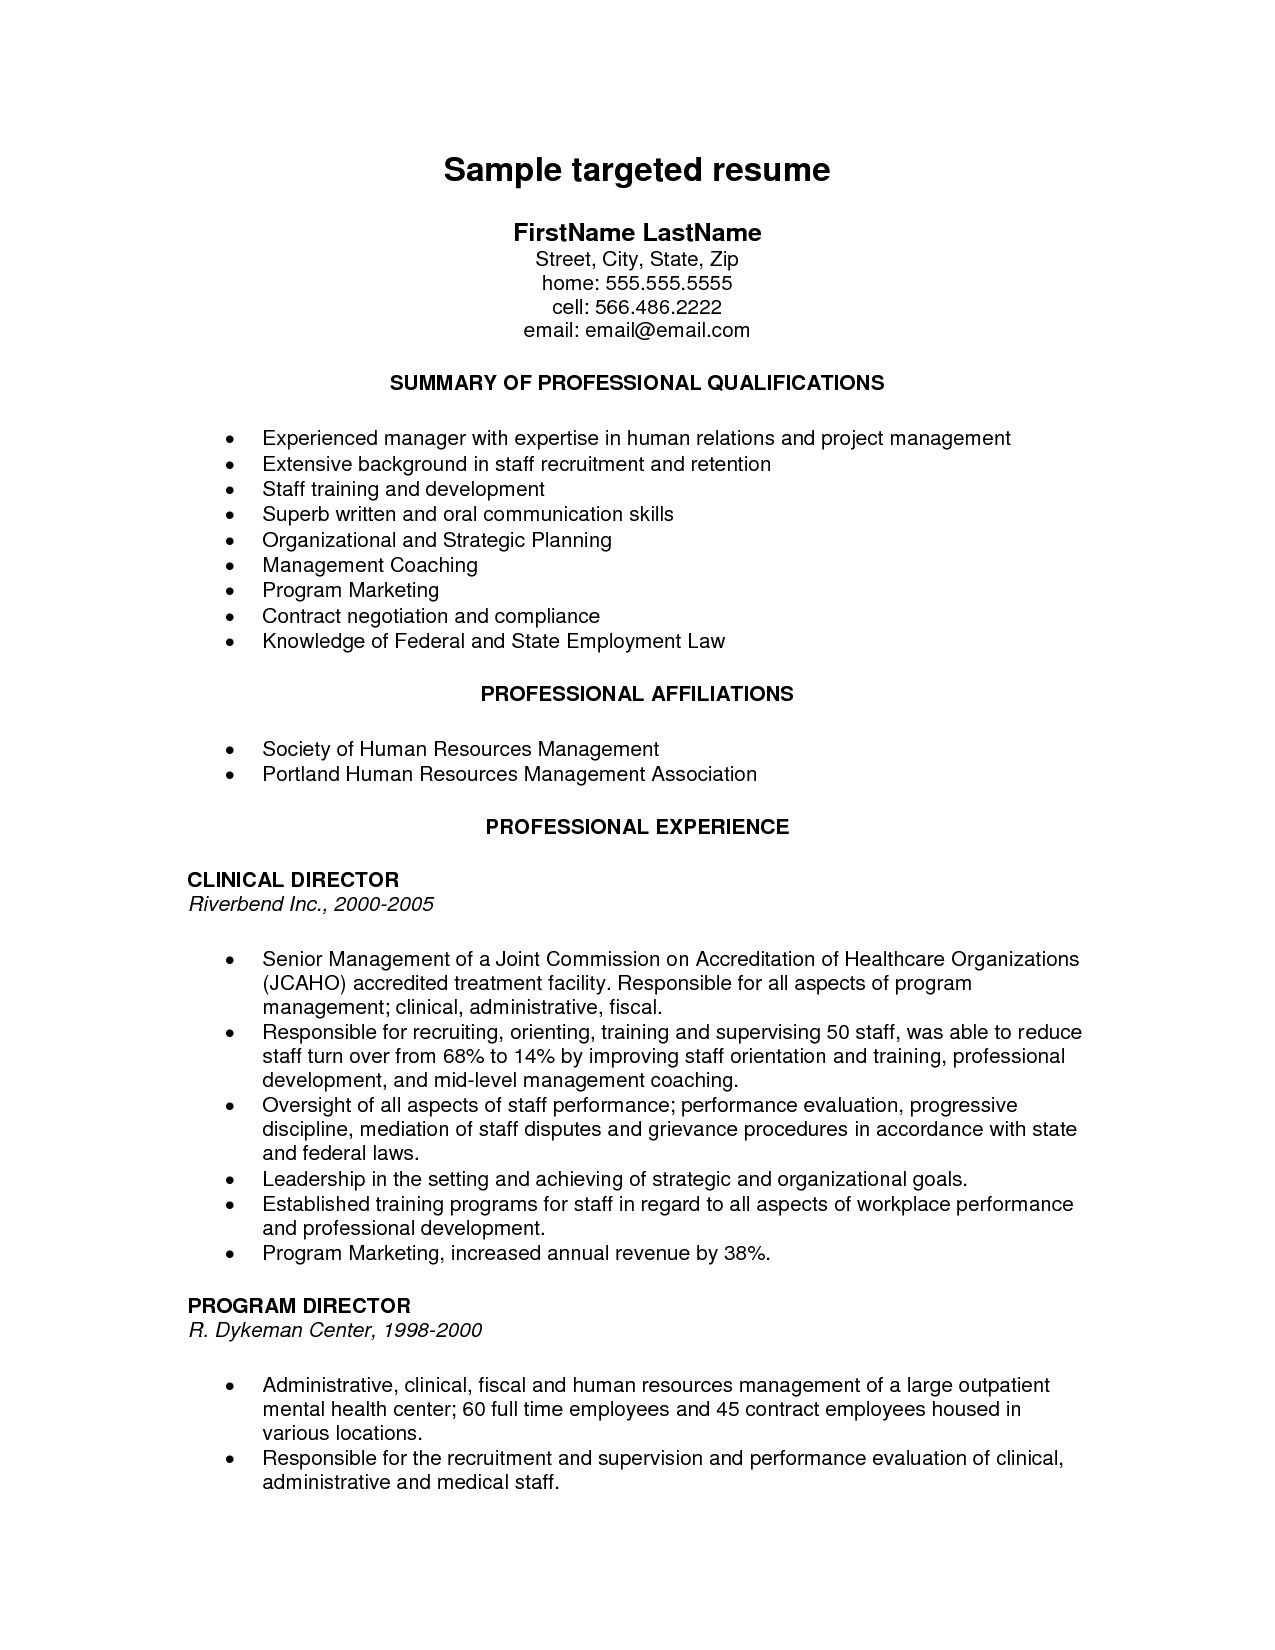 Director Of Environmental Services Resume Sample Sustainability Consultant Resume Sample October 2021